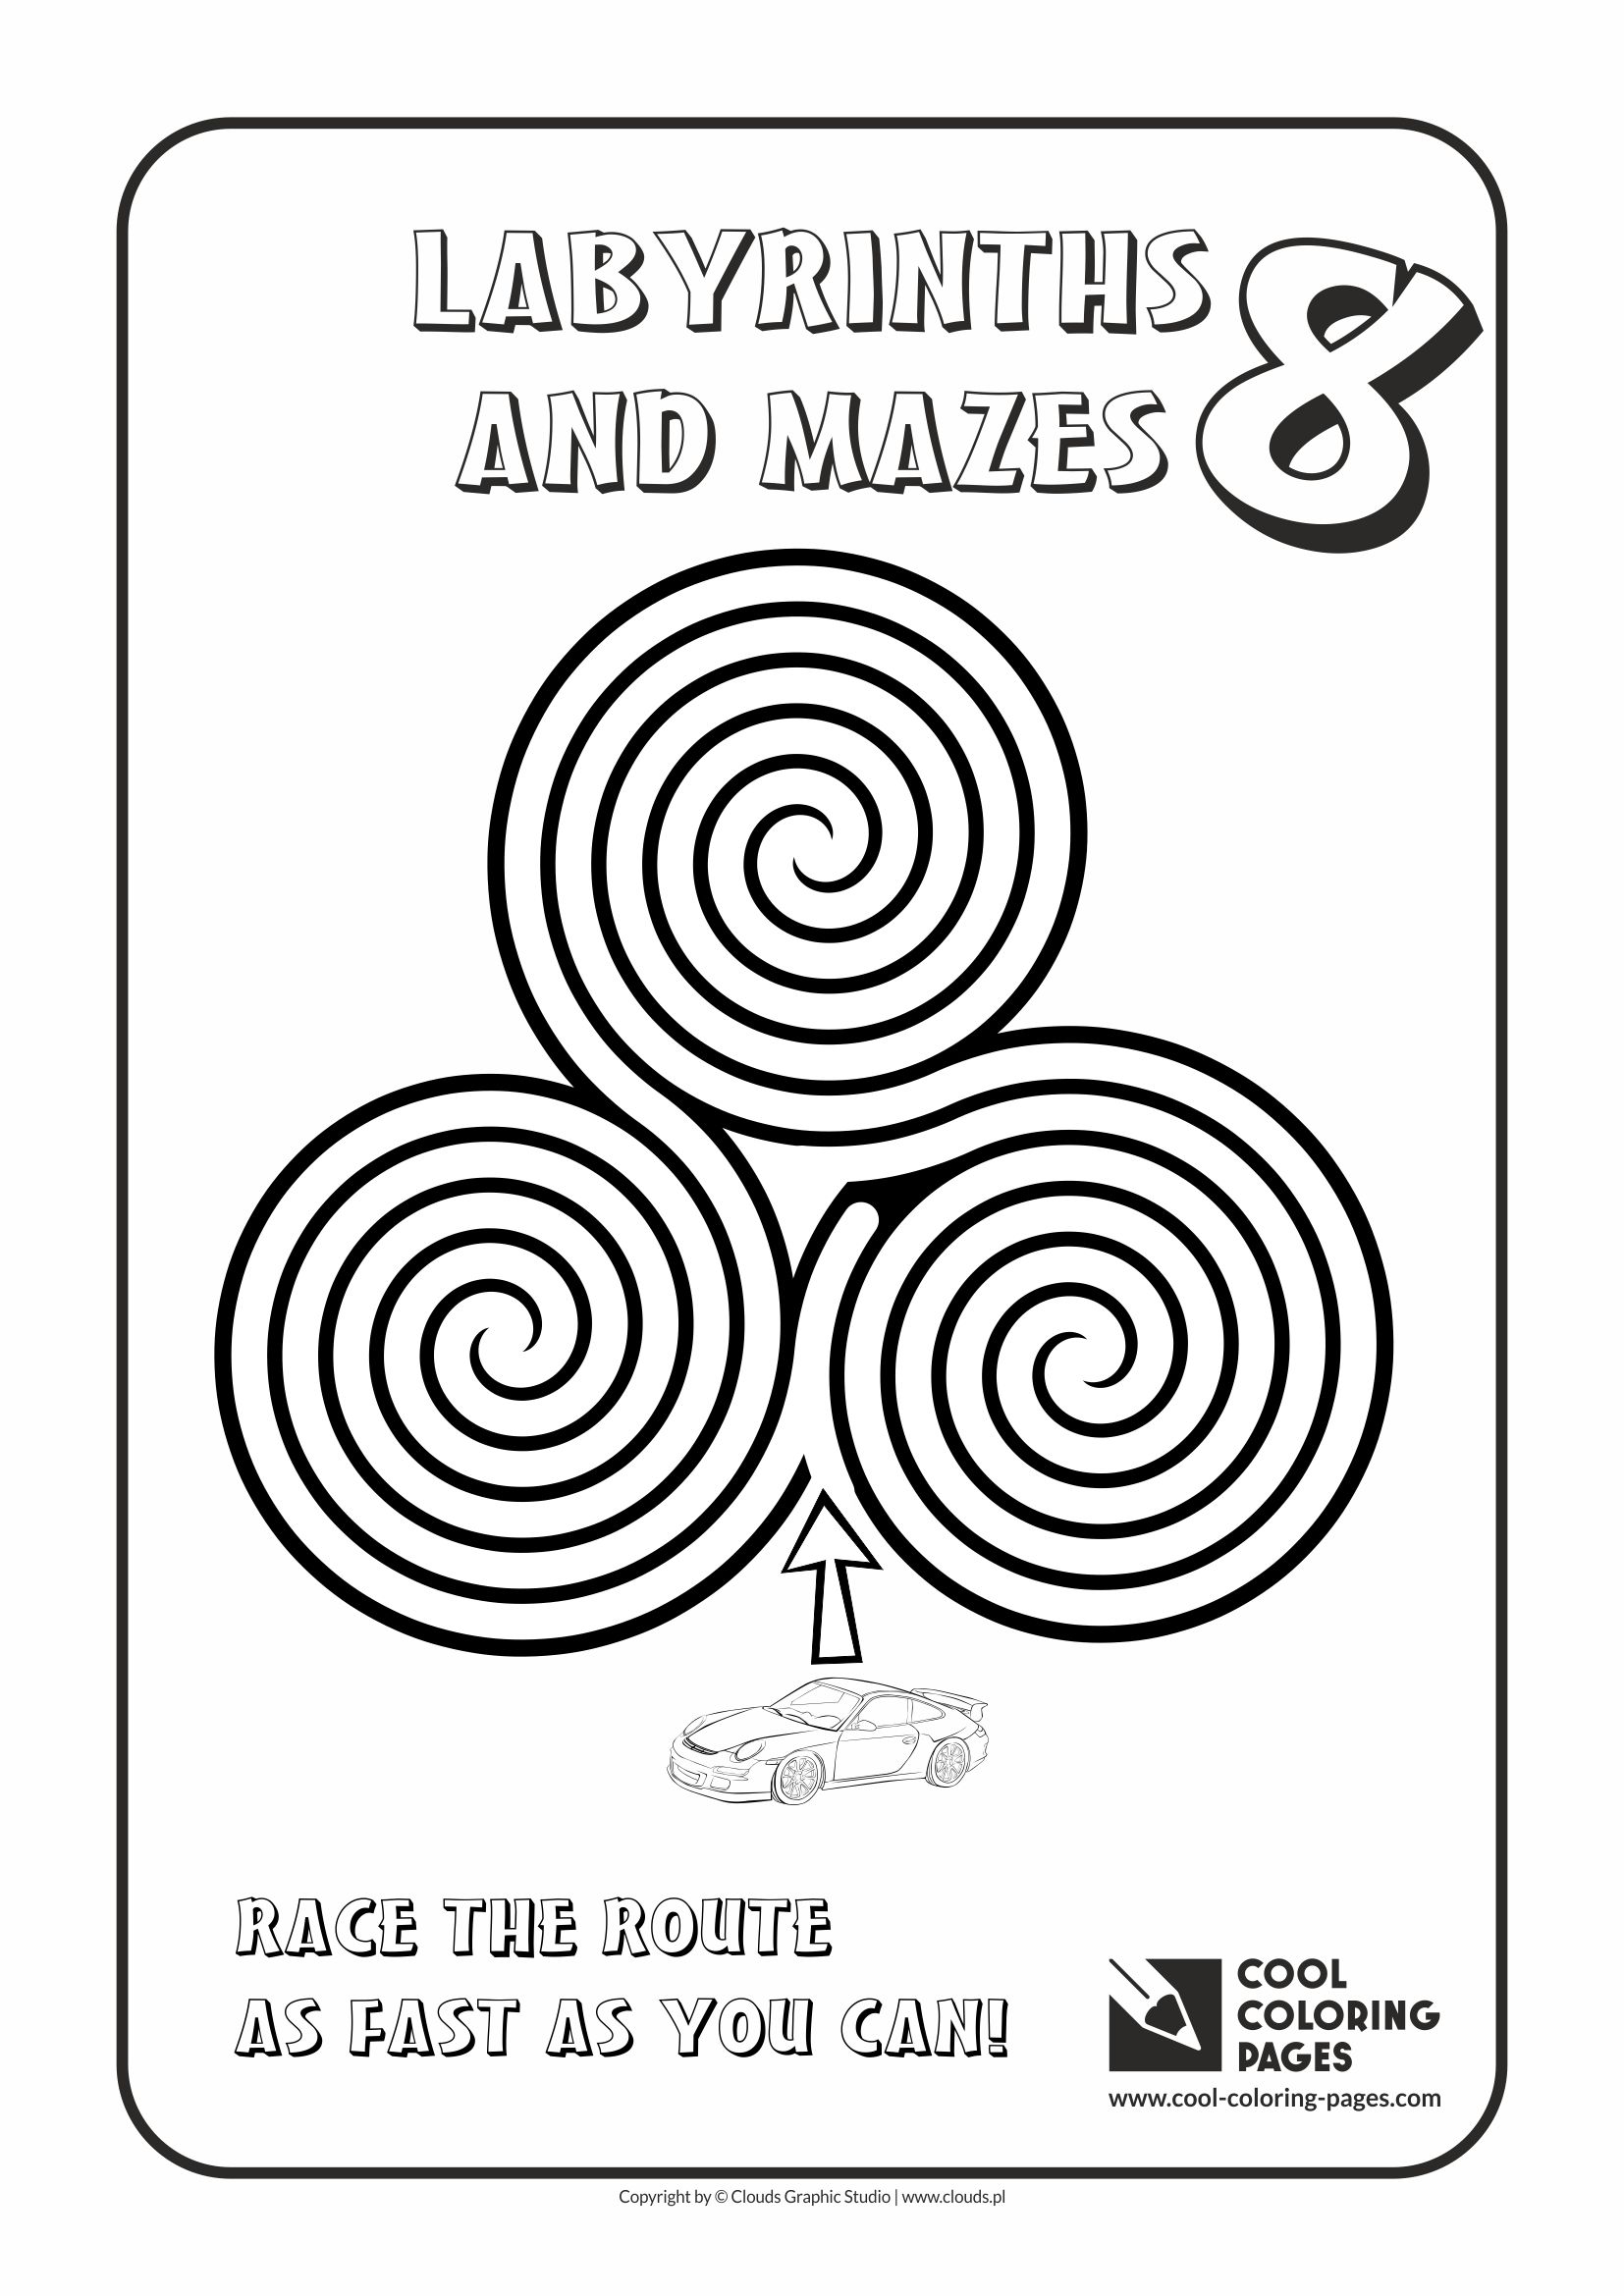 Cool Coloring Pages - Labyrinths and mazes / Maze no 8